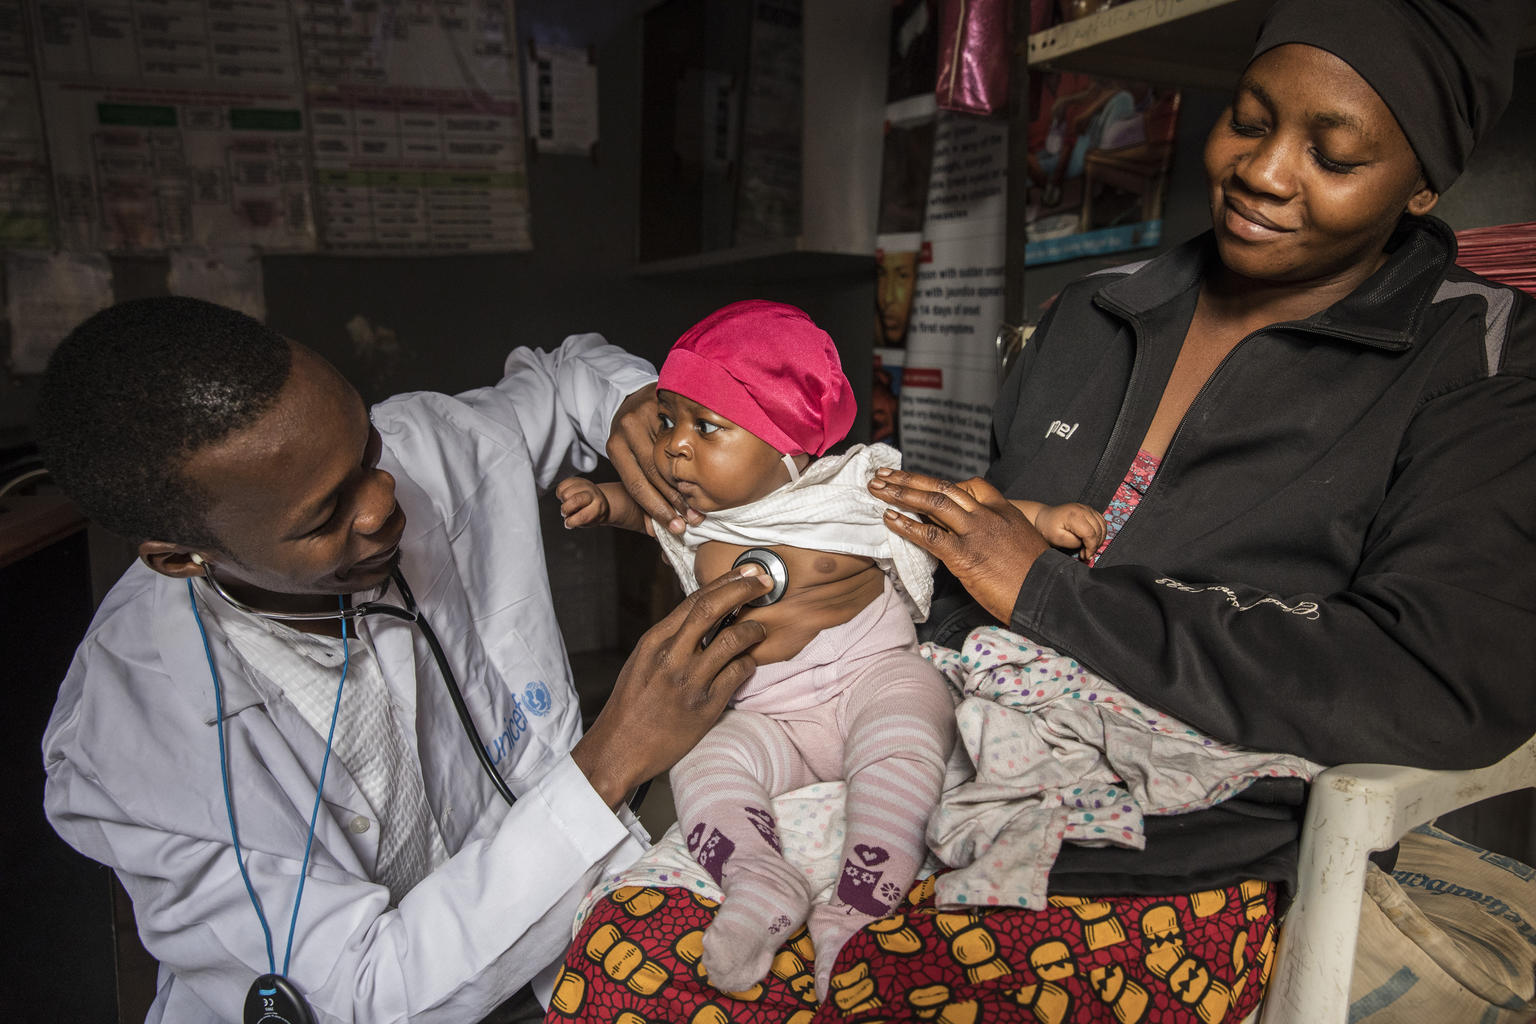 A health worker uses a stethoscope while examining one-year-old Beatrice in a health clinic in Yola, Adamawa state, northeastern Nigeria.